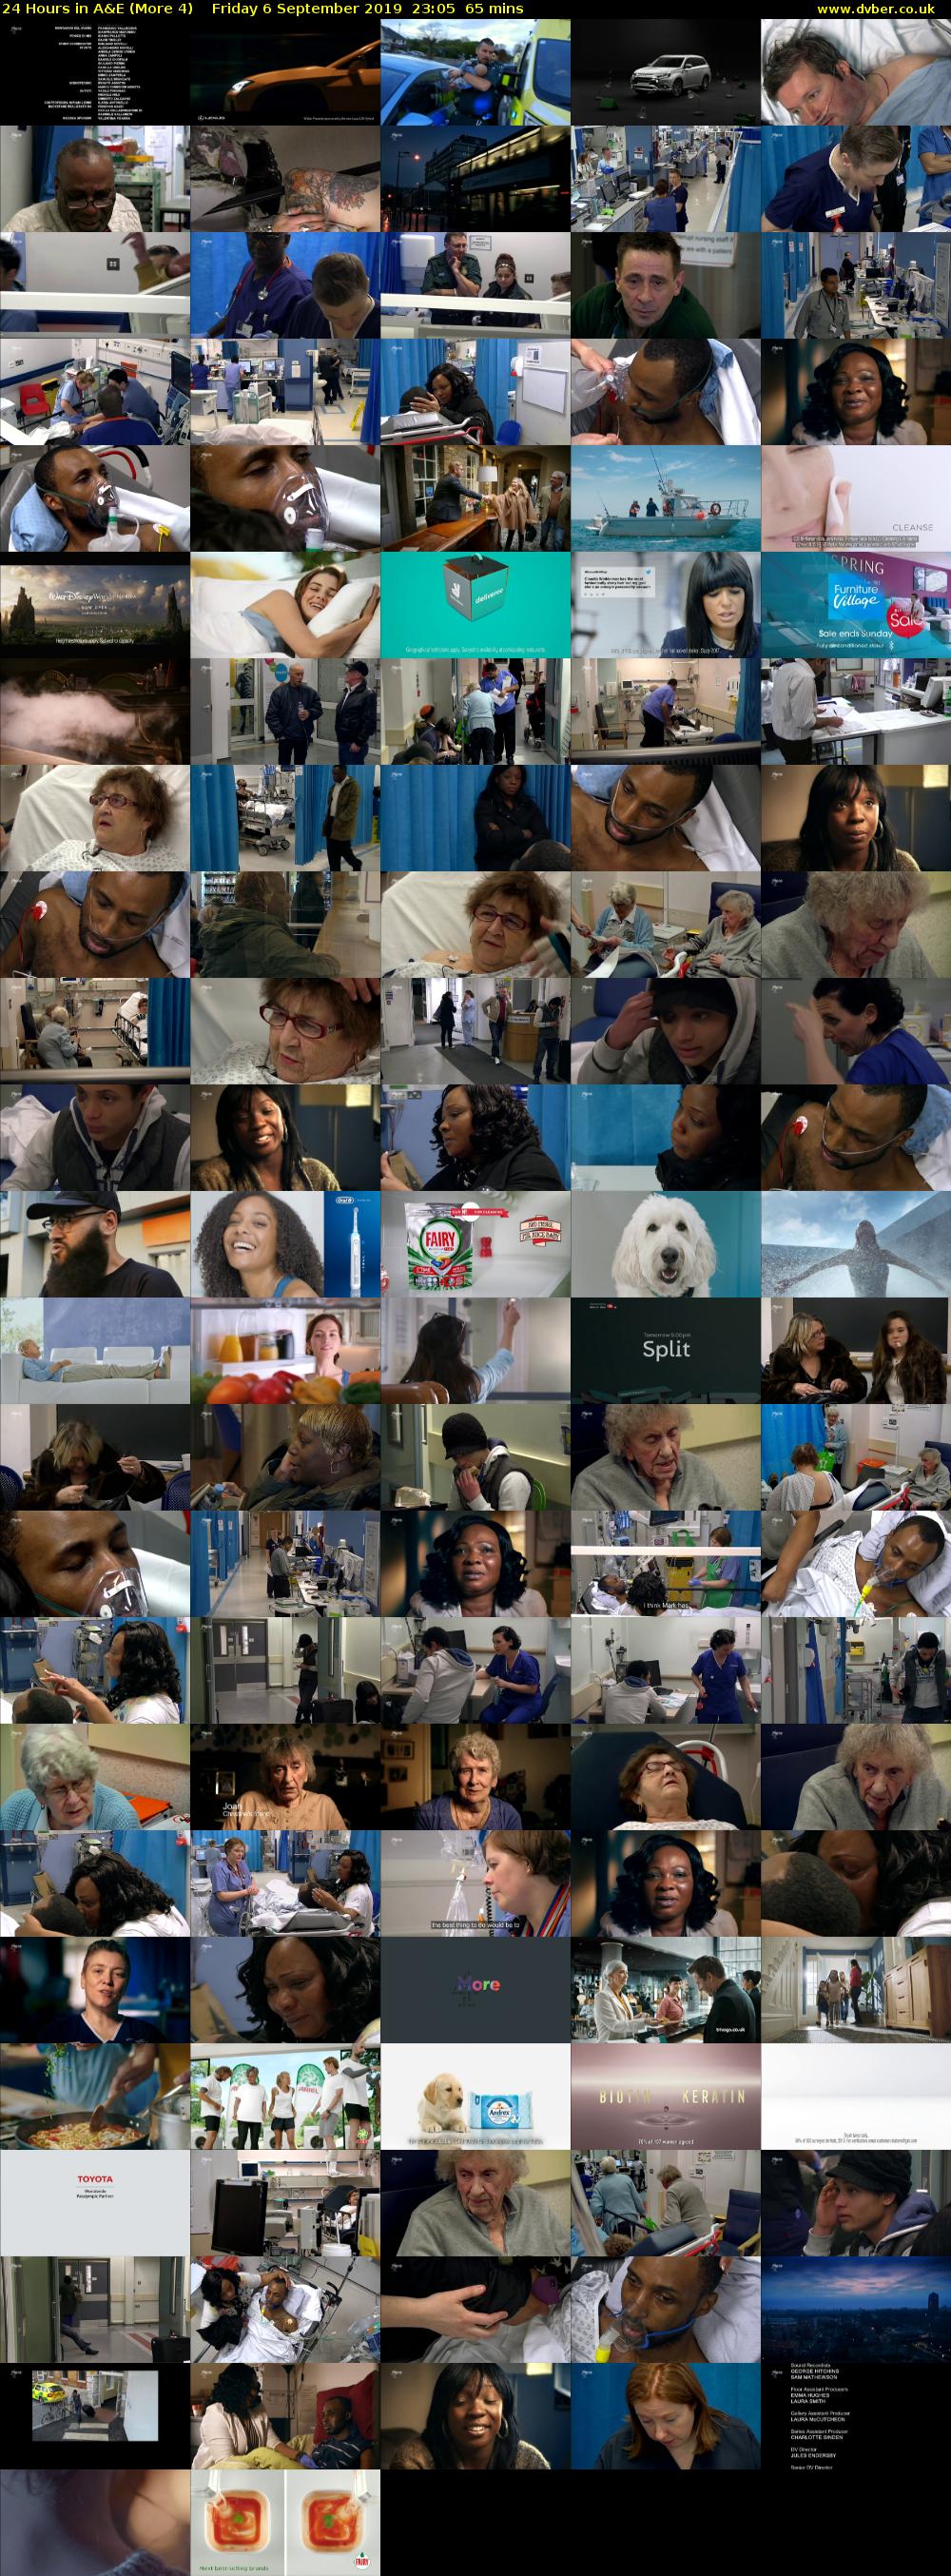 24 Hours in A&E (More 4) Friday 6 September 2019 23:05 - 00:10